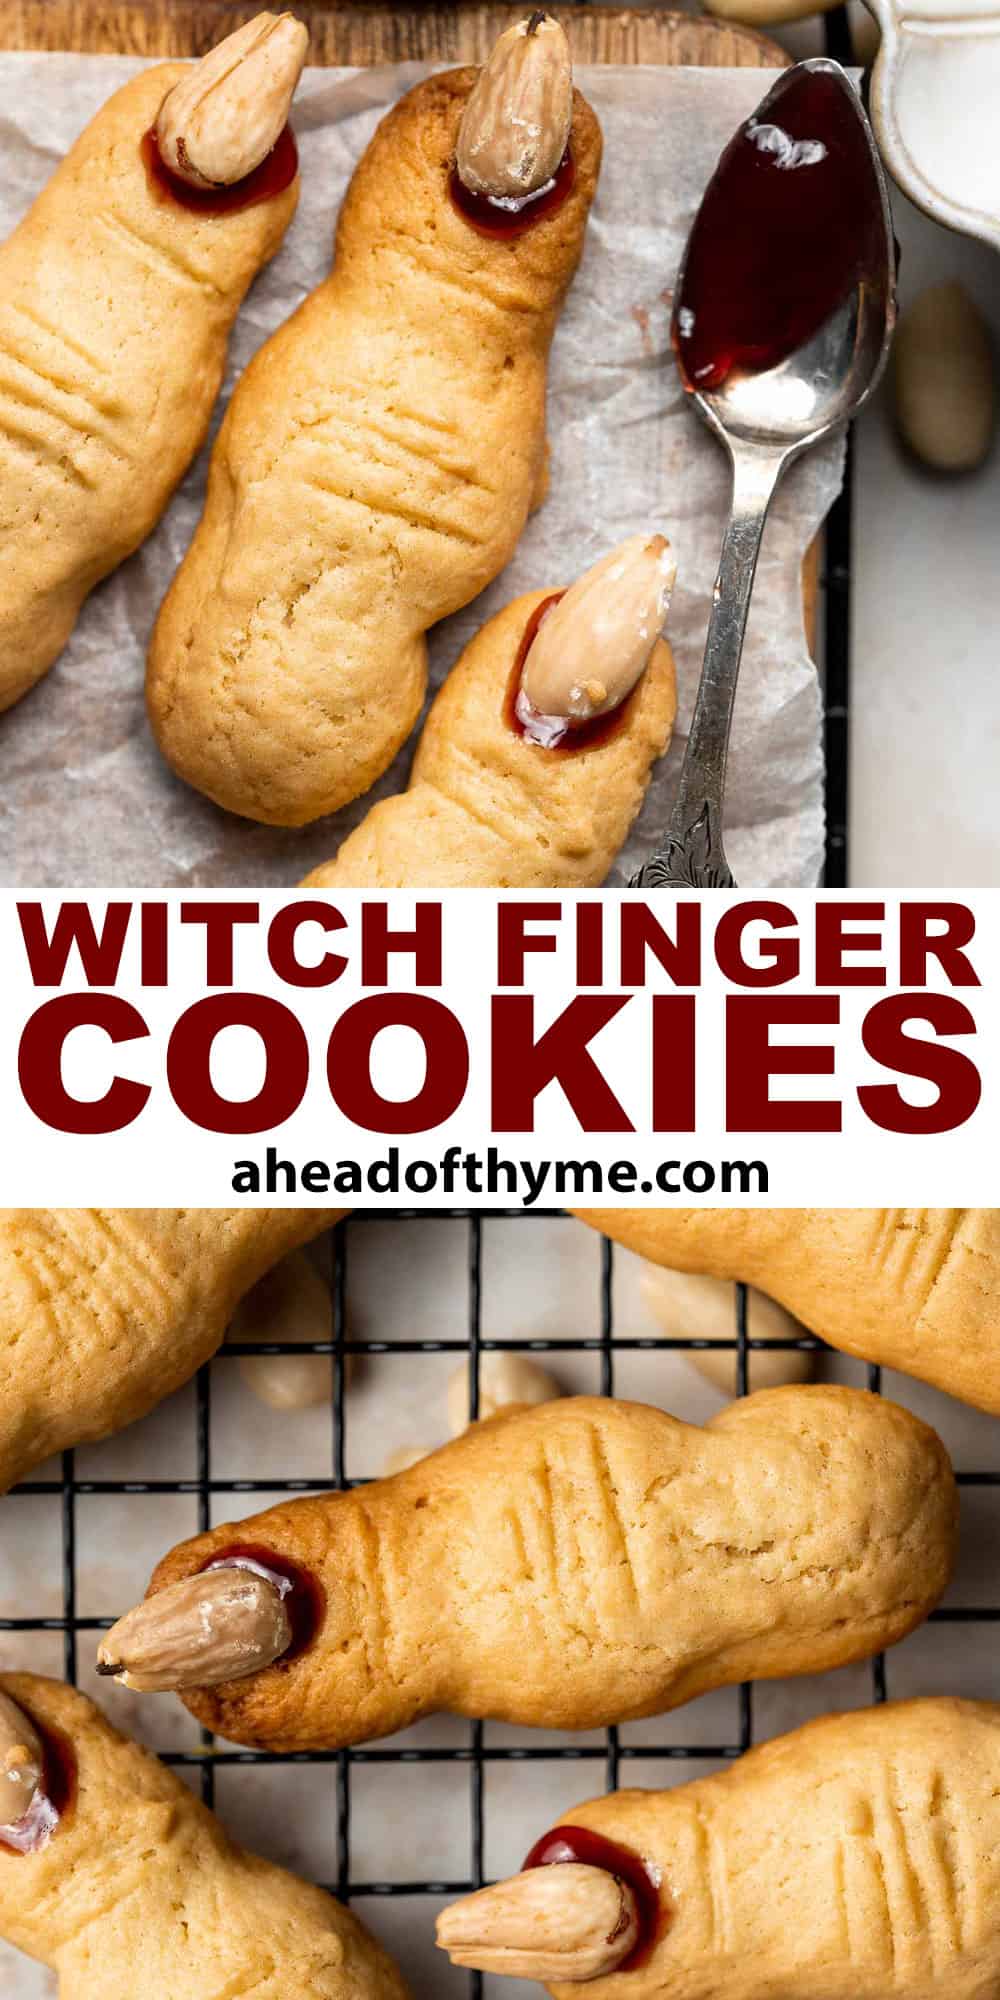 Get your cauldron bubbling, these creepy Witch Finger Cookies are here to stir up some Halloween fun. These spooky treats are quick, easy, and delicious. | aheadofthyme.com